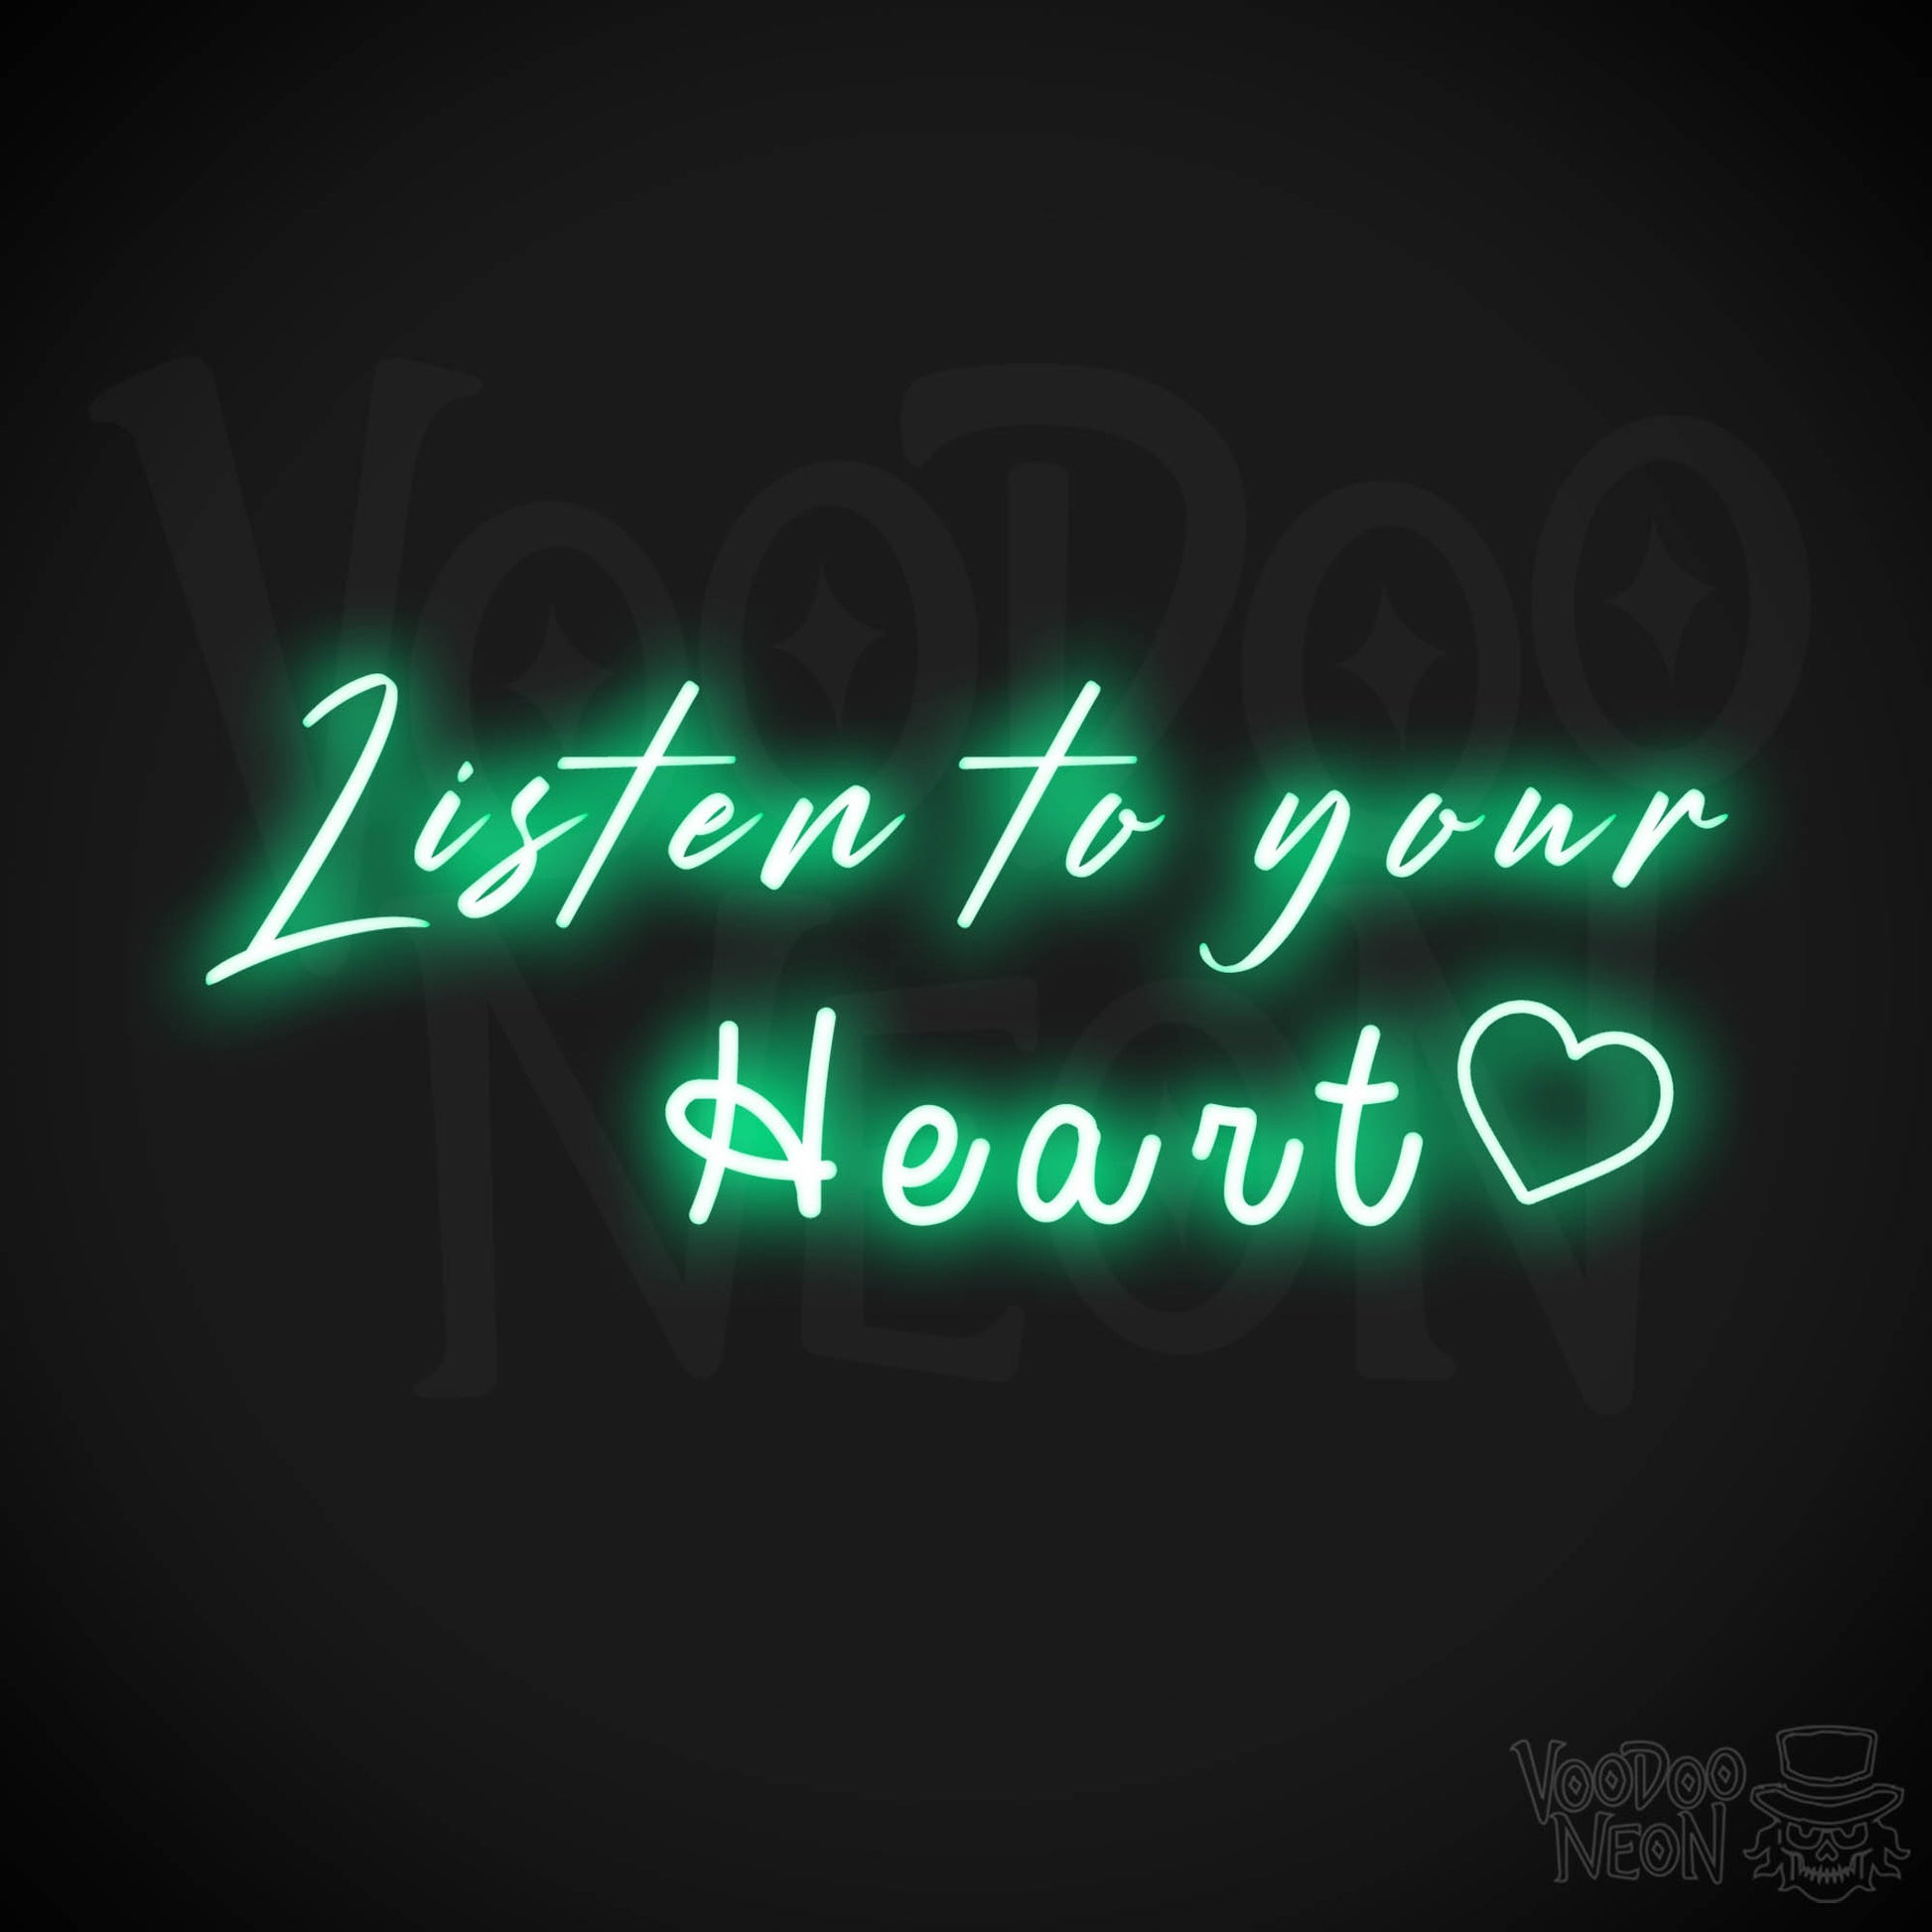 Listen To Your Heart Neon Sign - Neon Listen To Your Heart Sign - Wedding Sign - Color Green